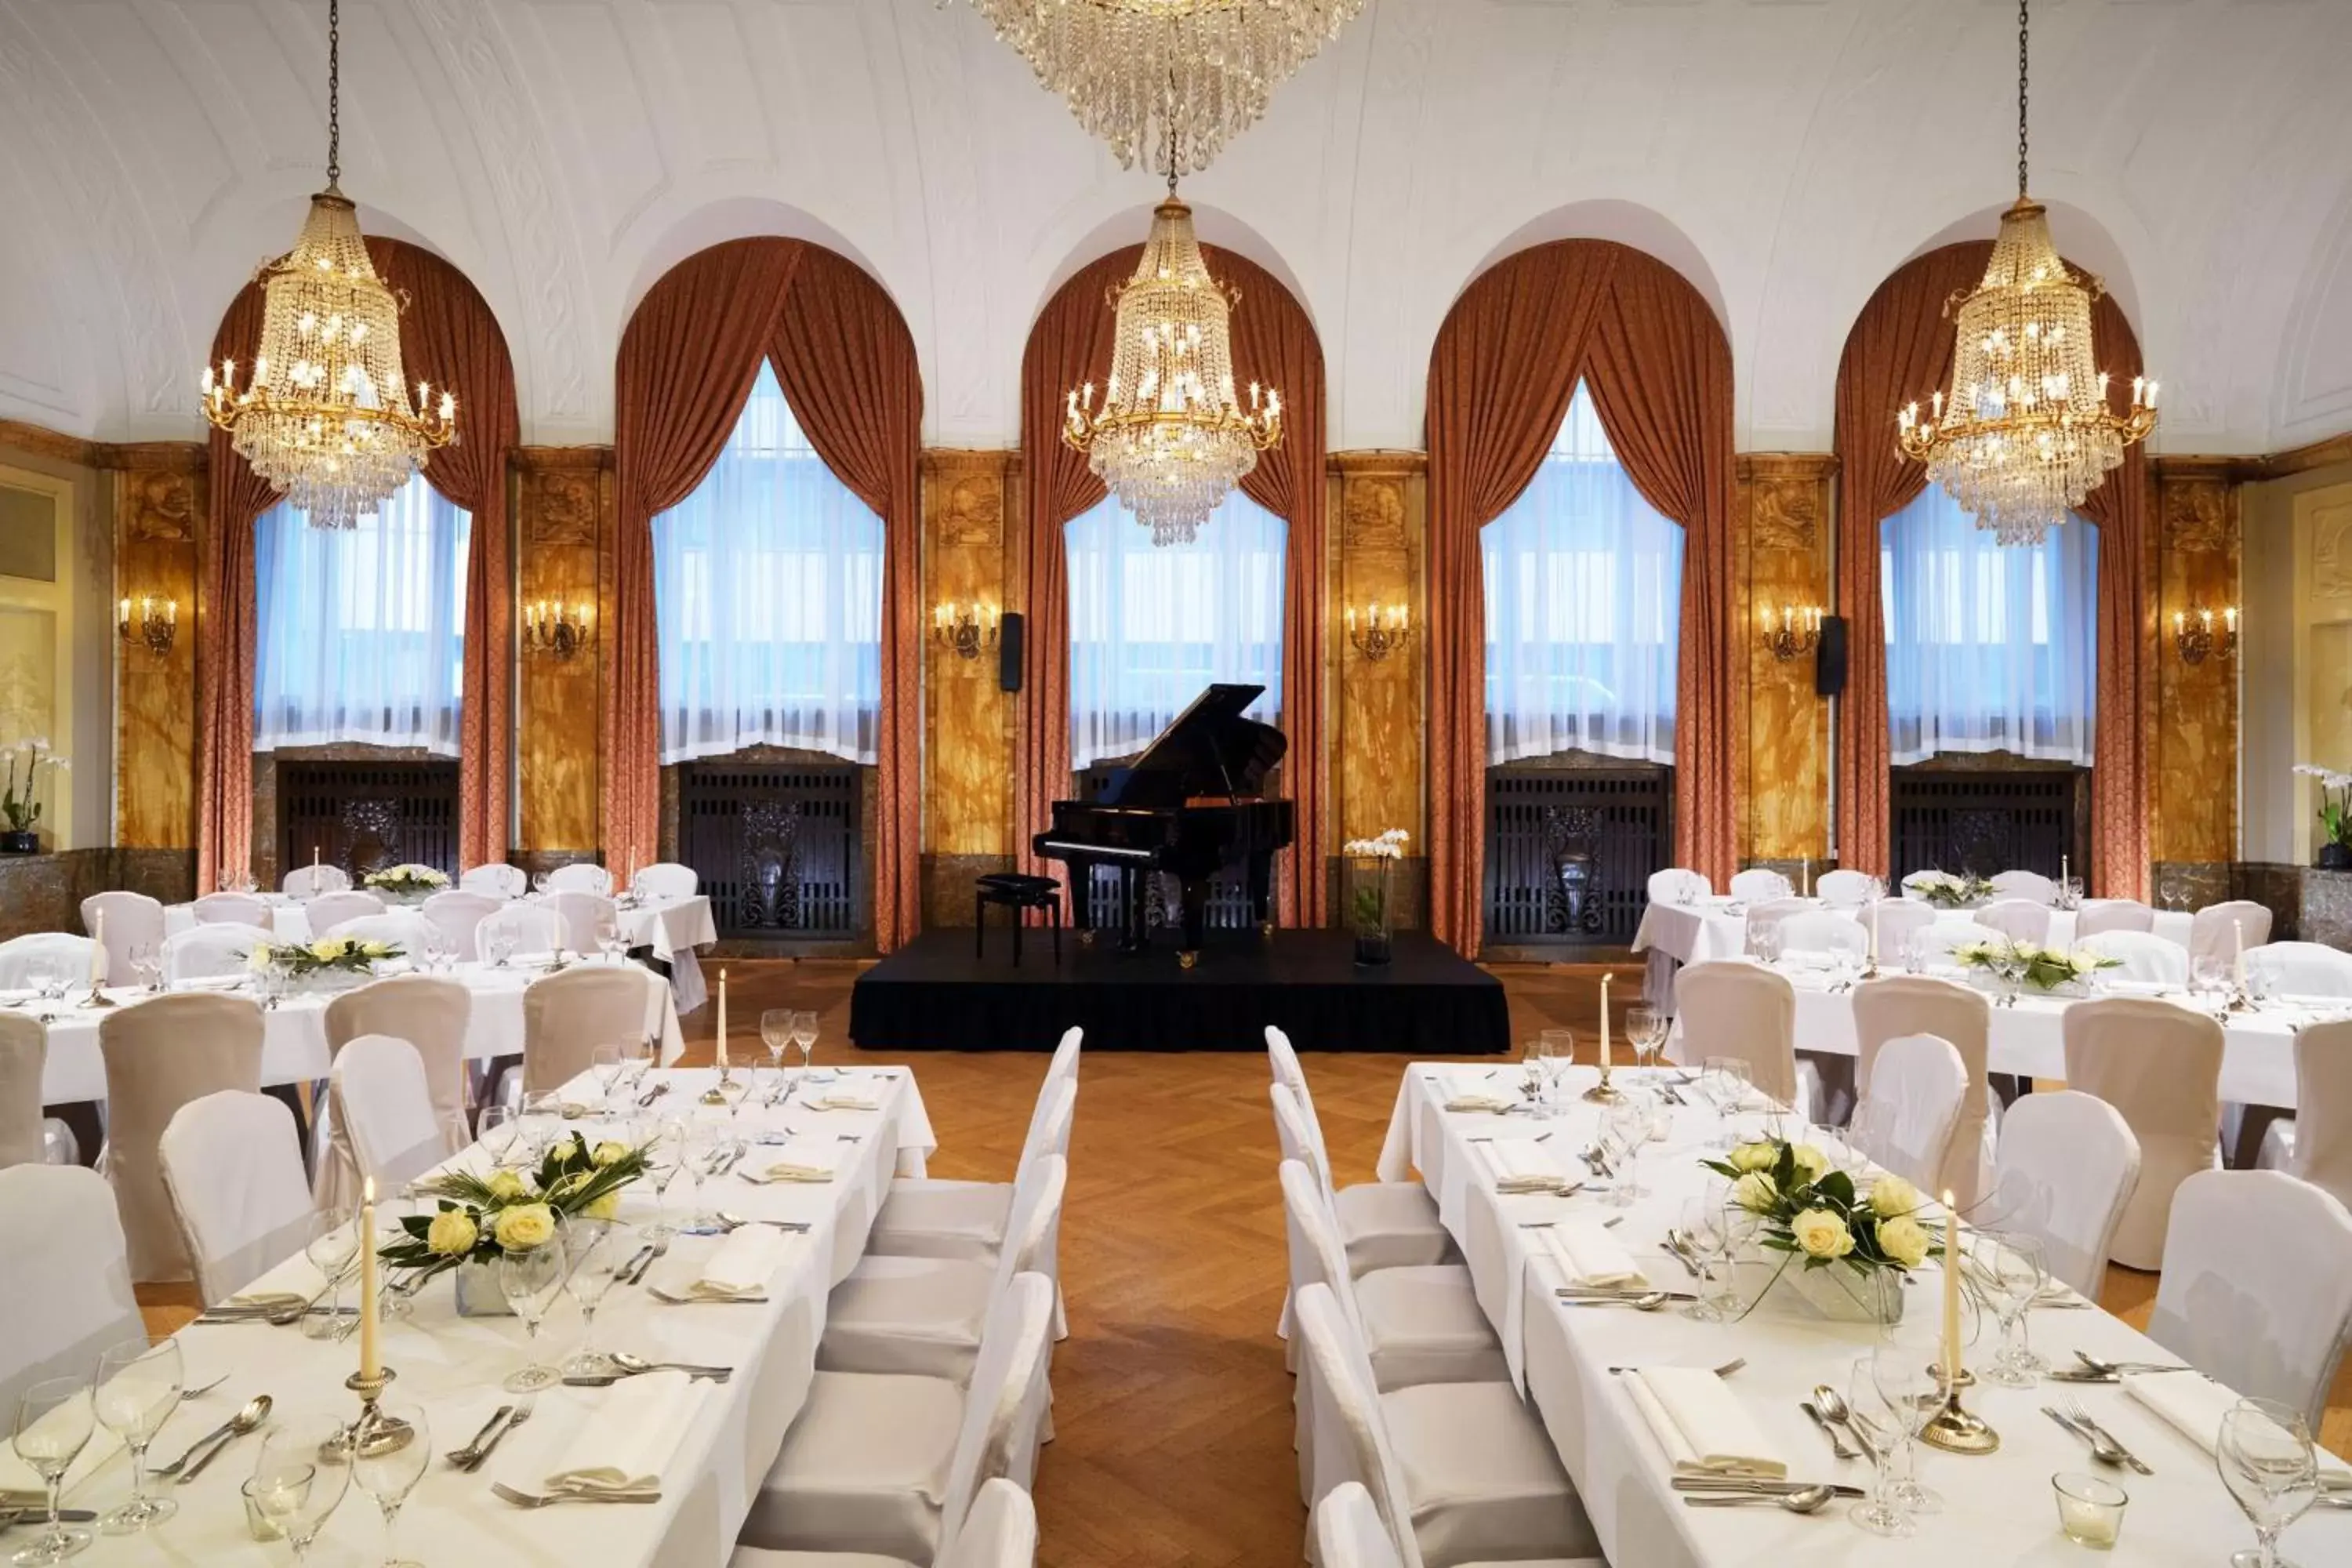 Meeting/conference room, Banquet Facilities in Le Méridien Grand Hotel Nürnberg